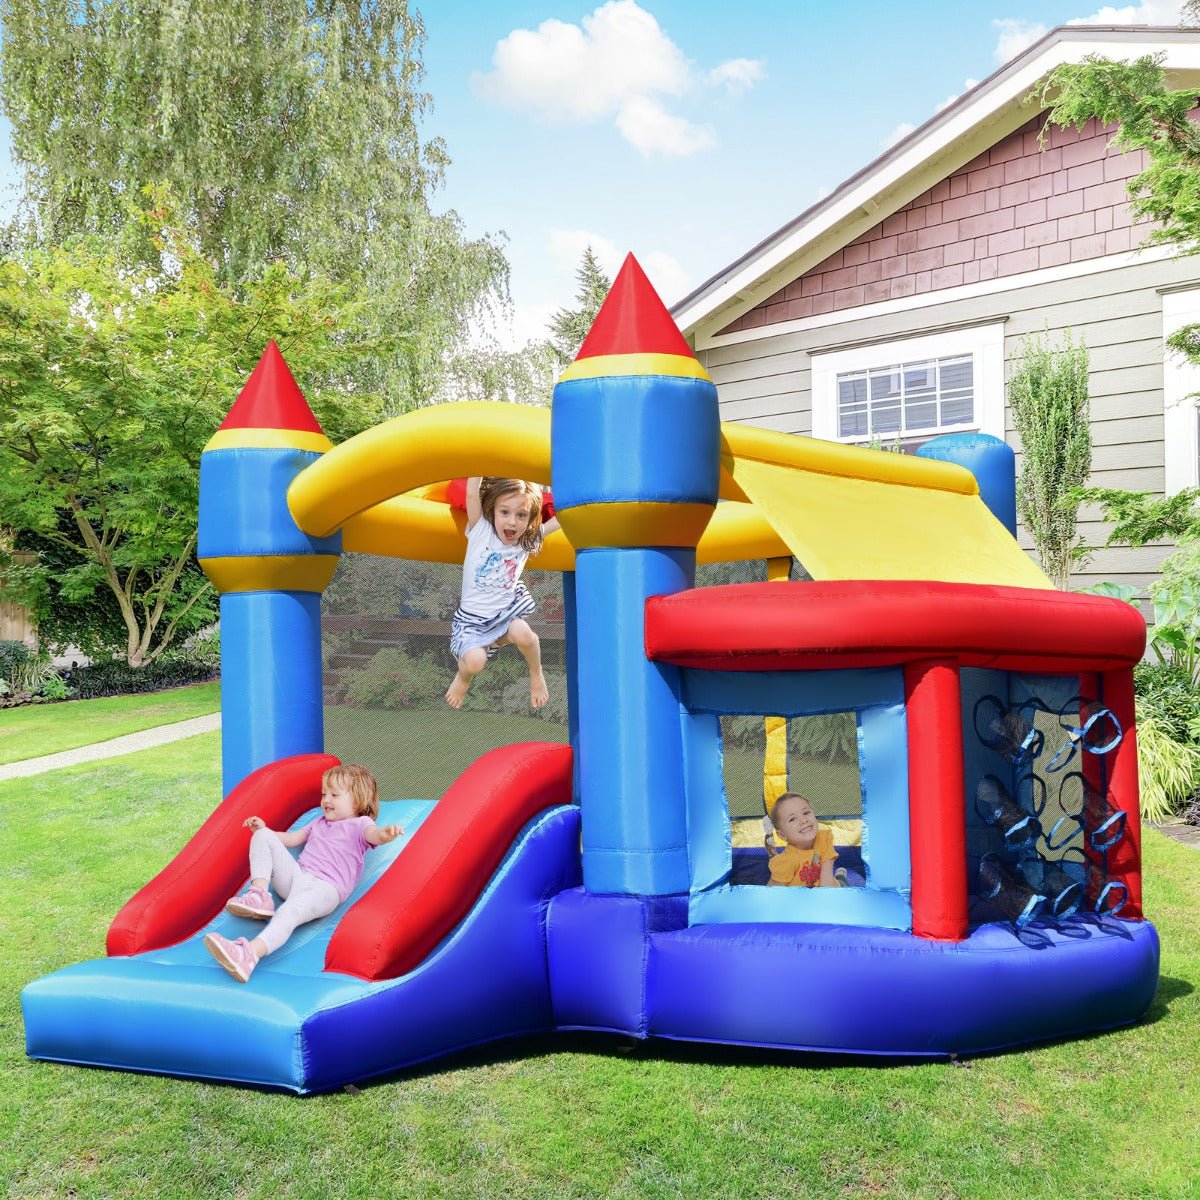 Endless Backyard Adventures: Inflatable Bounce House with Slide (Blower)